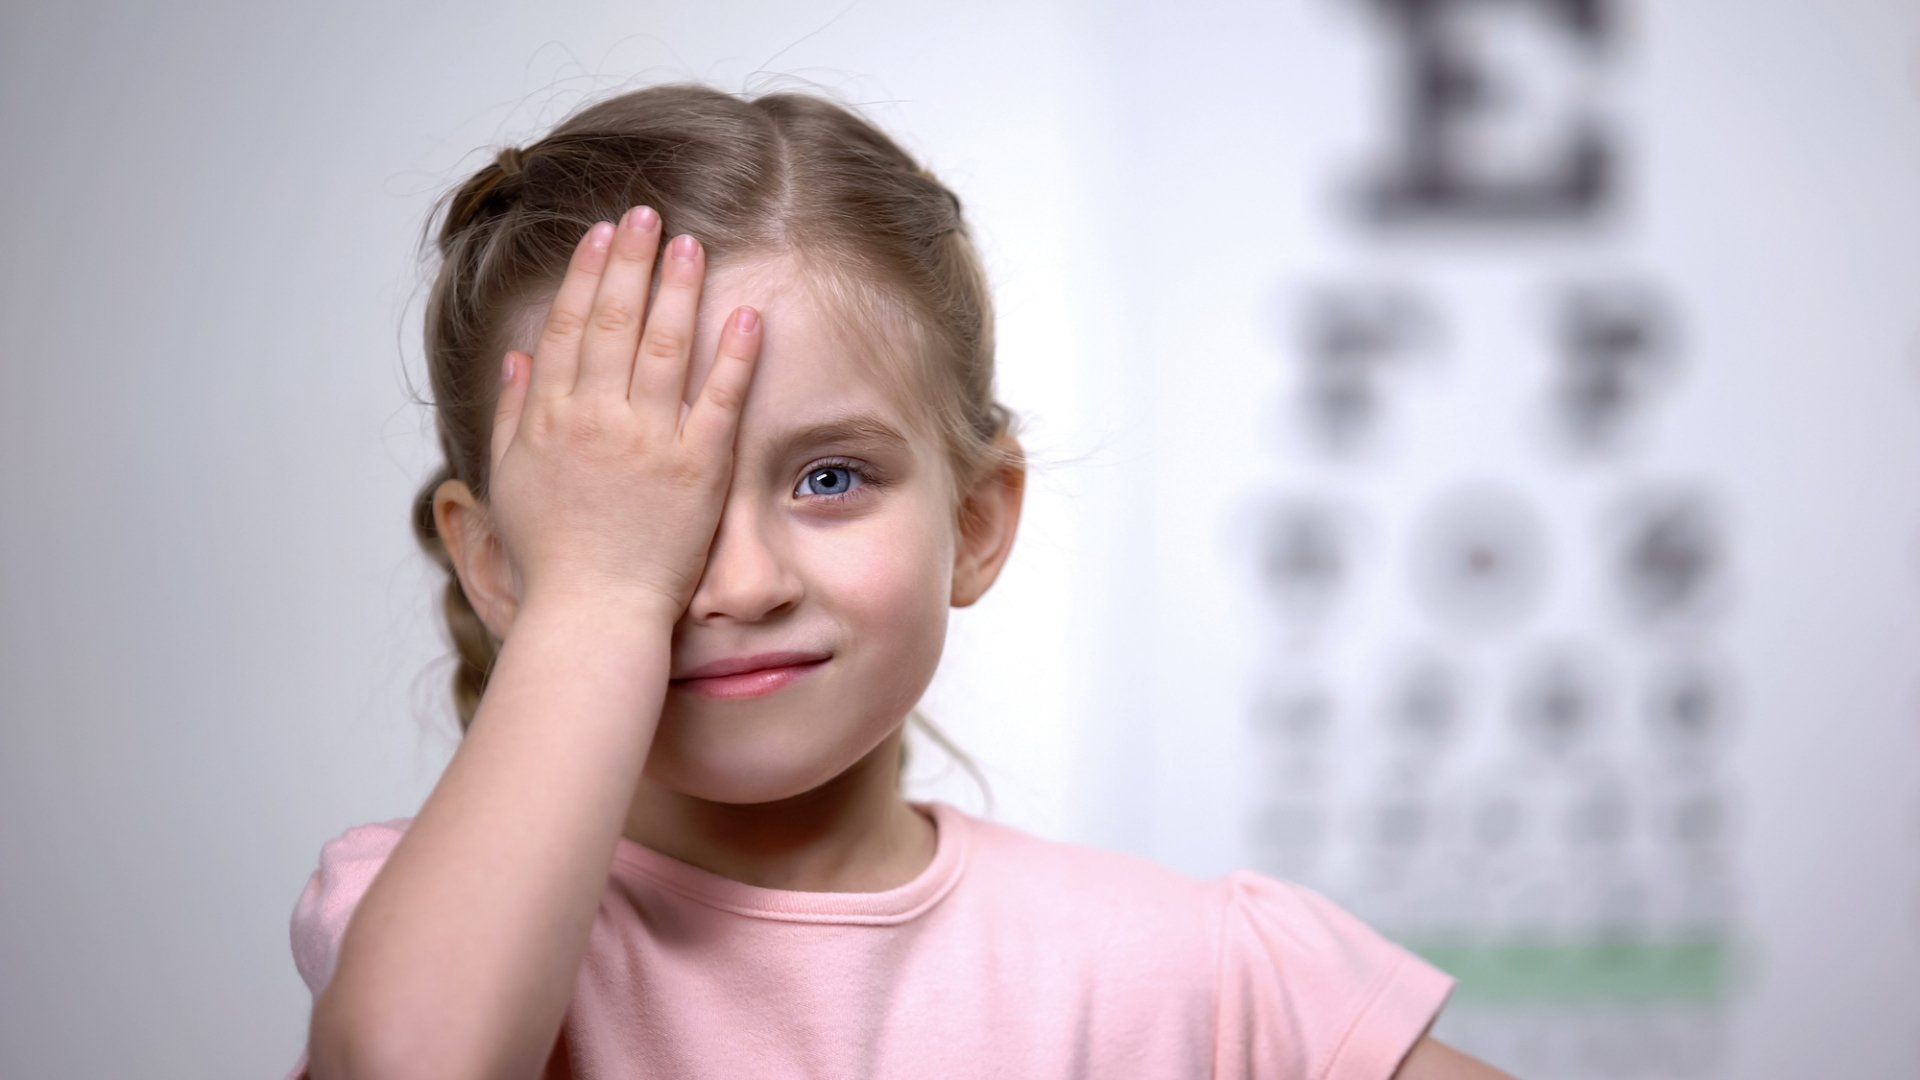 WORSENING OF CHILDREN’S VISION LINKED TO PANDEMIC